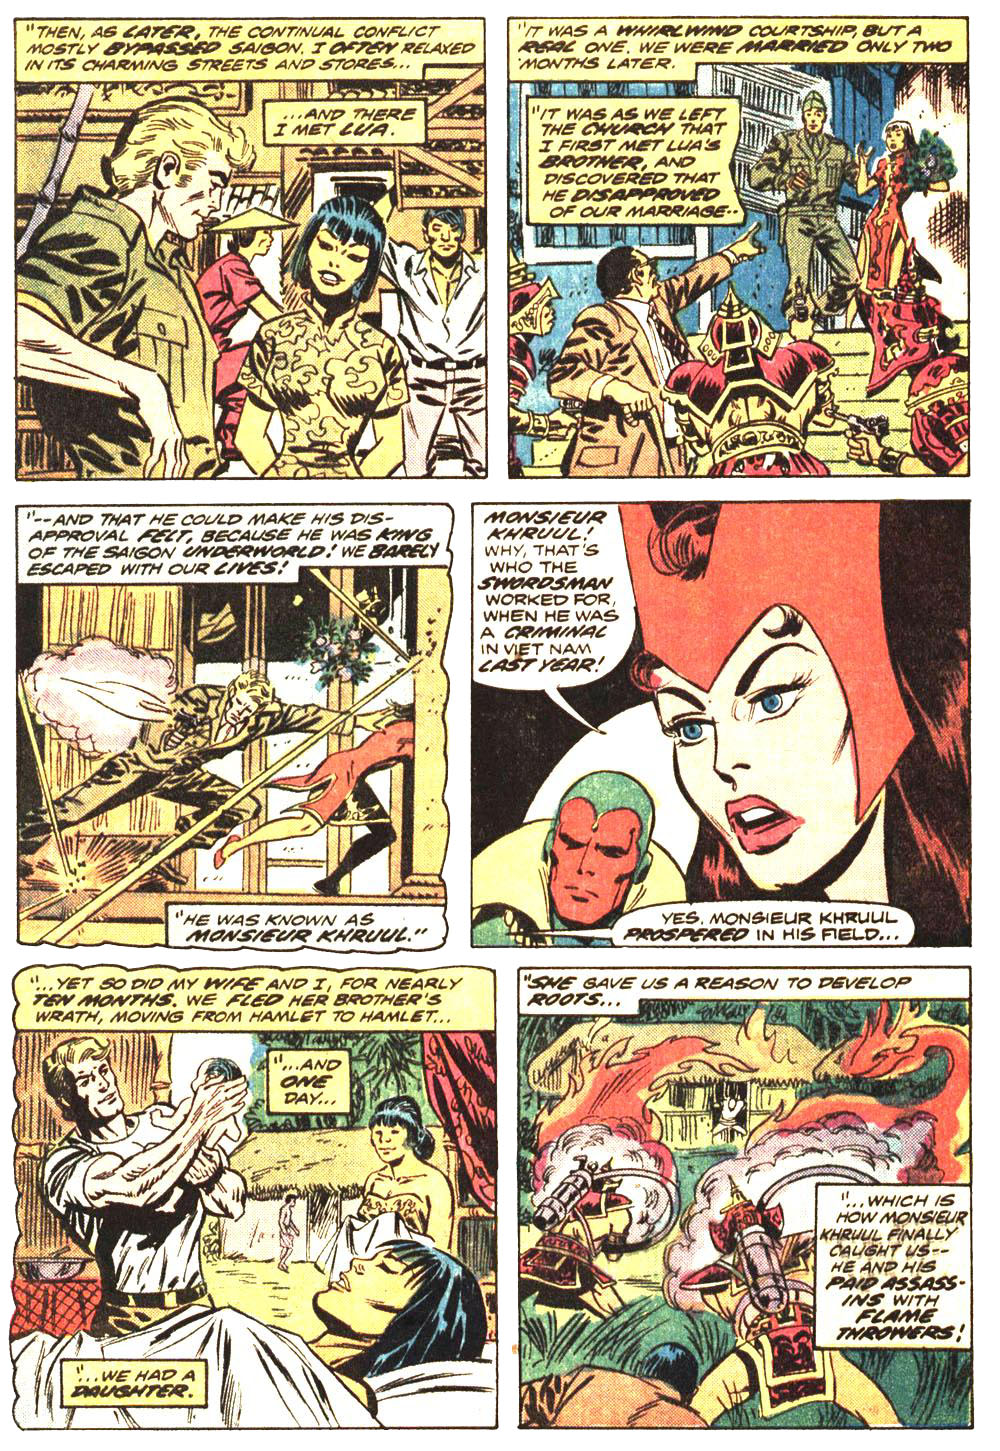 The Avengers (1963) 123 Page 4